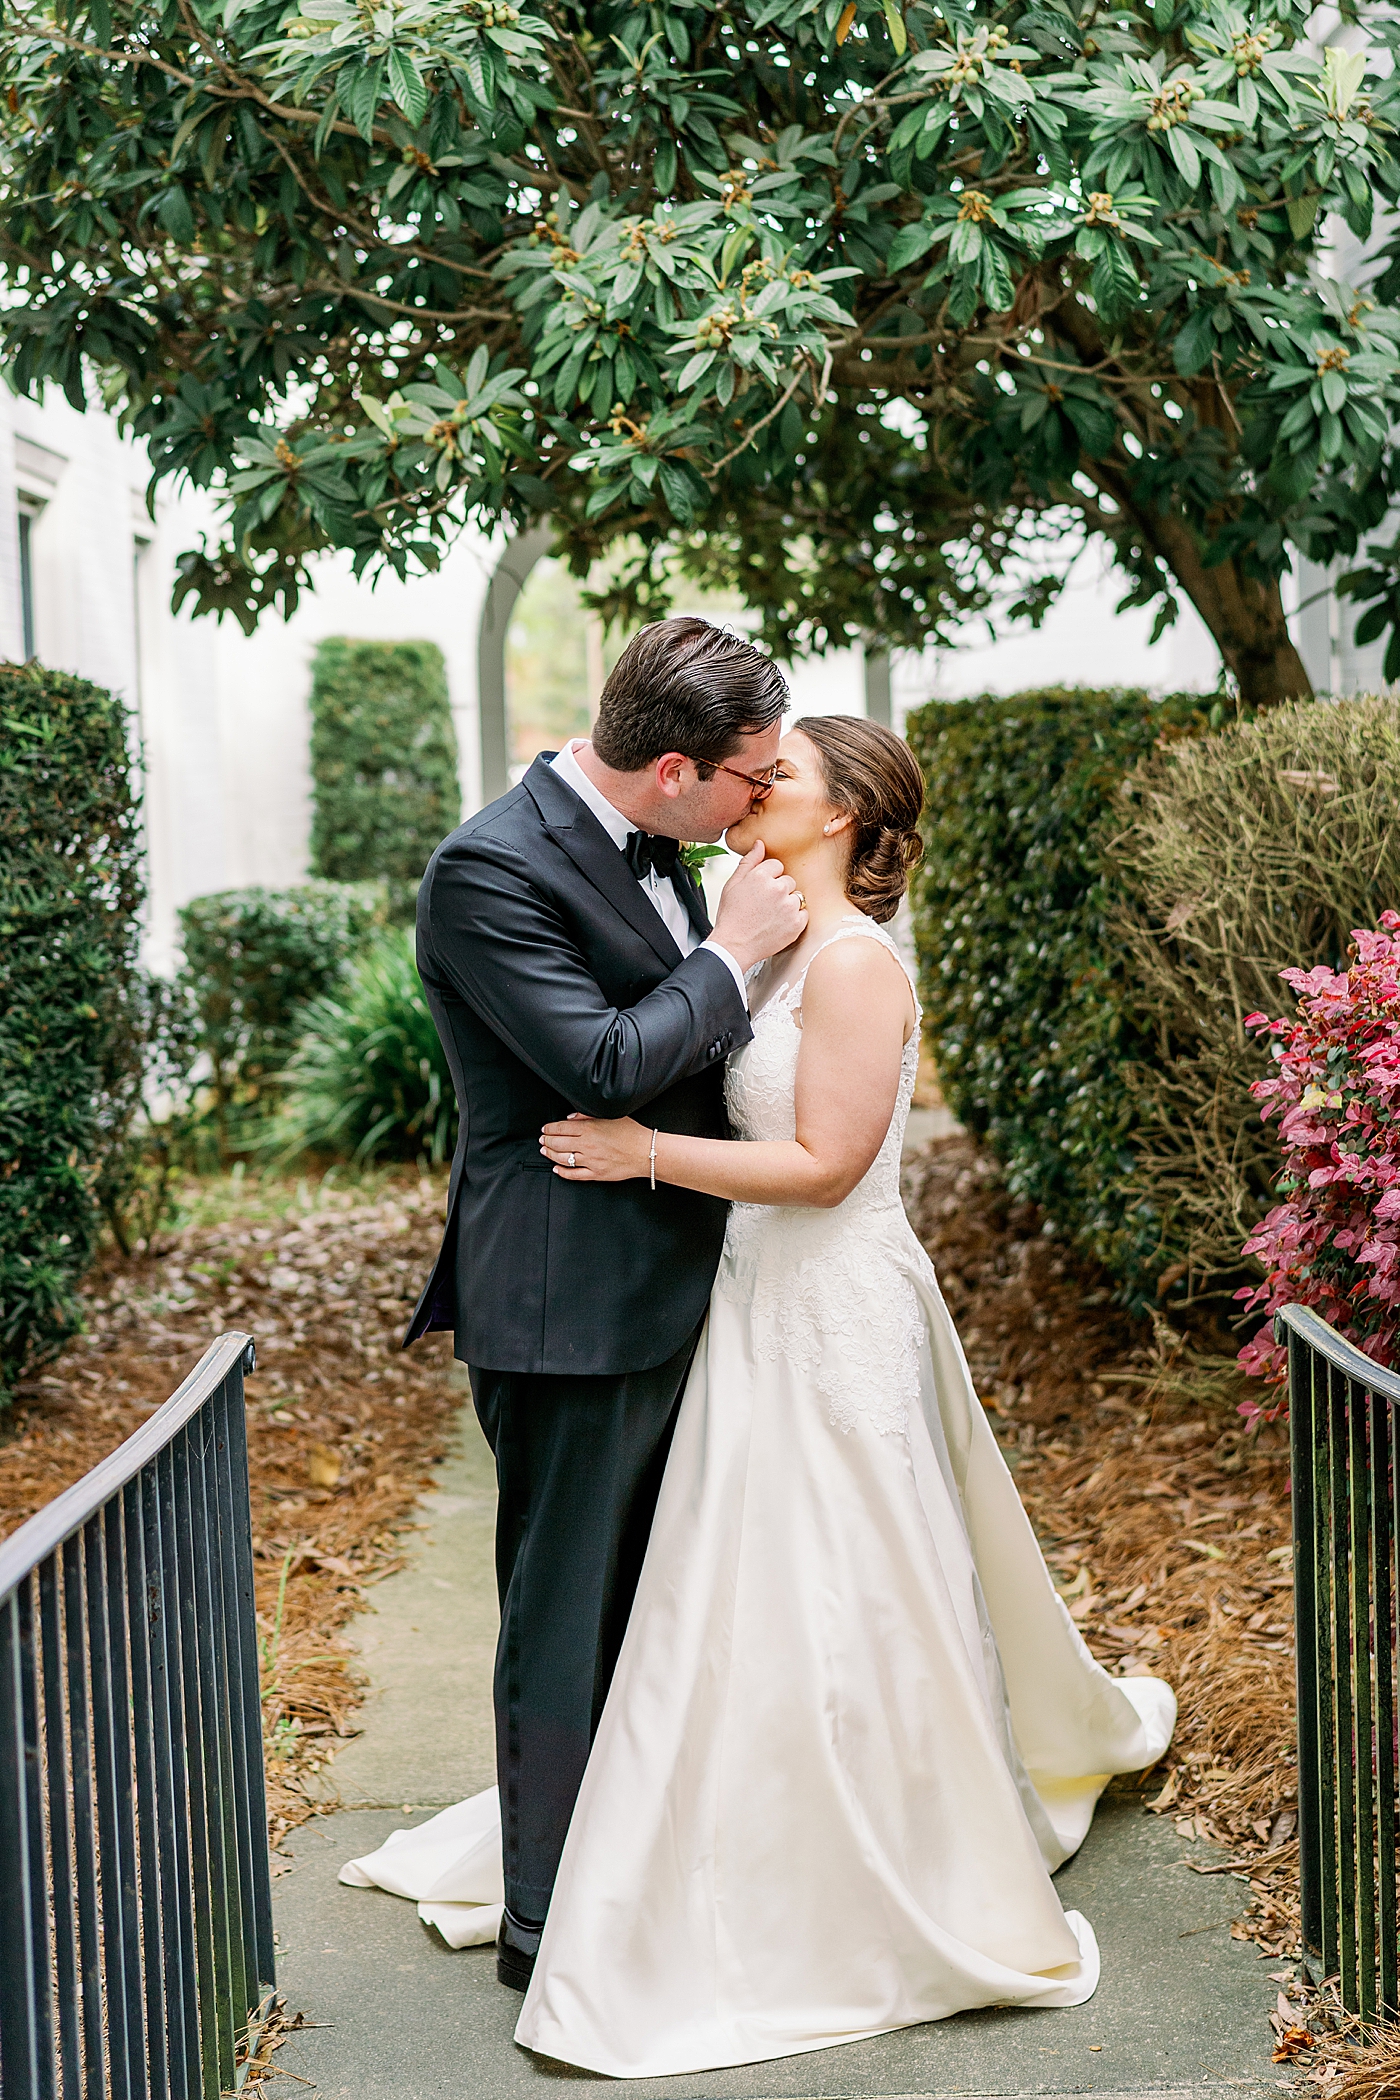 Bride and groom kissing after their first look | Photo by Annie Laura Photography